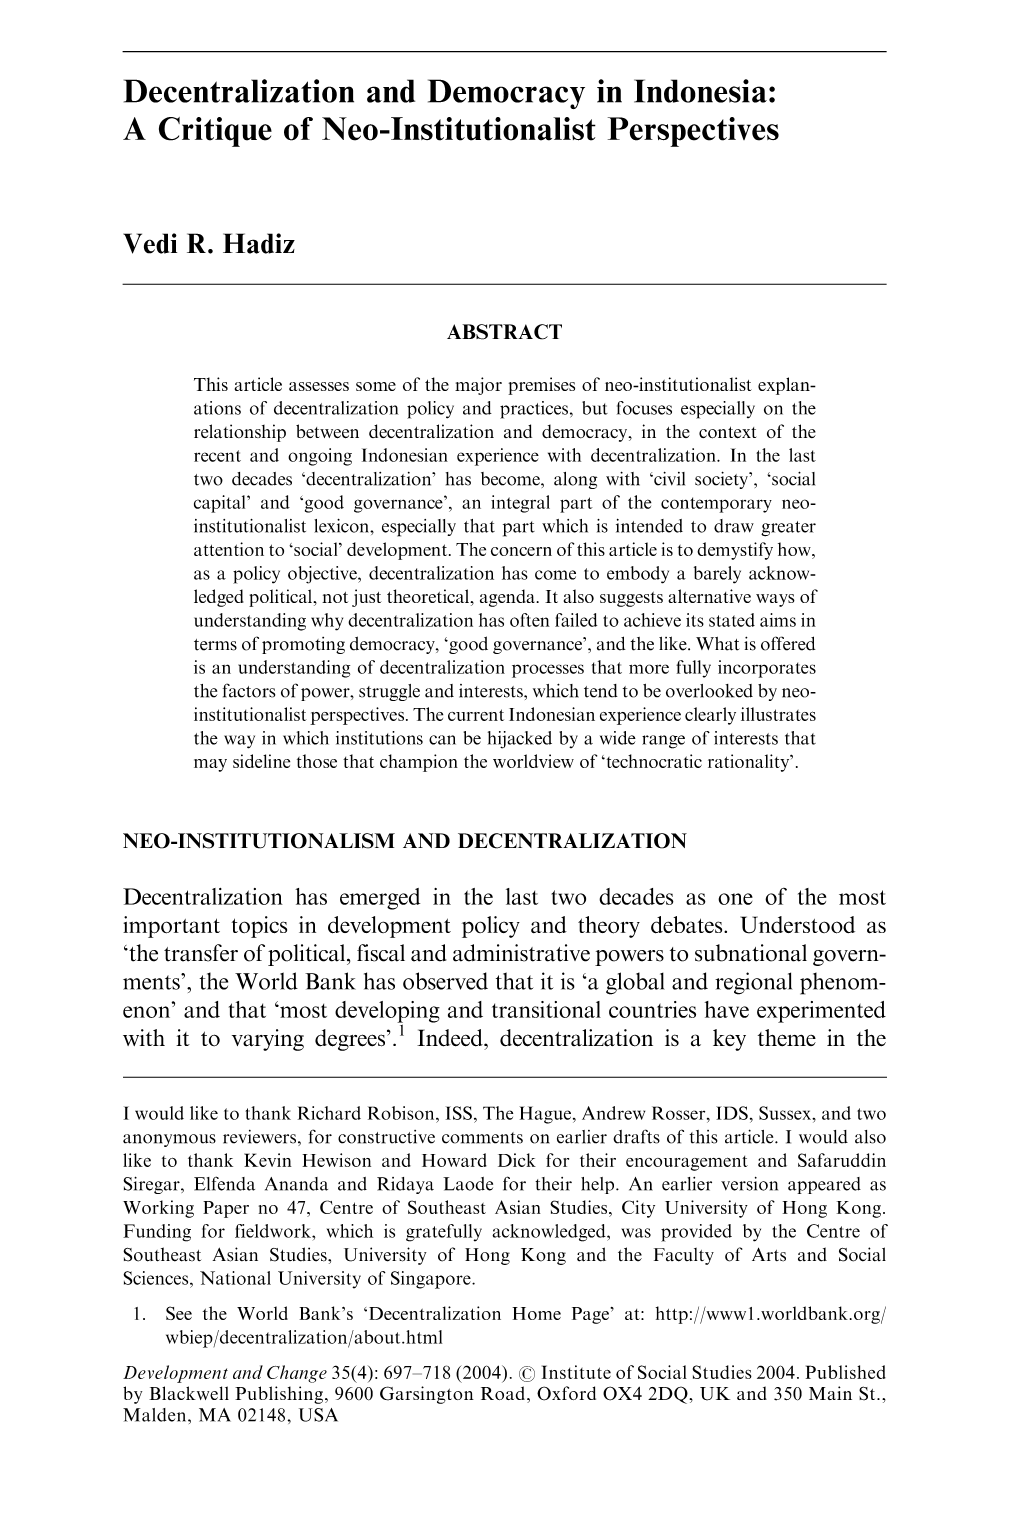 Decentralization and Democracy in Indonesia: a Critique of Neo-Institutionalist Perspectives